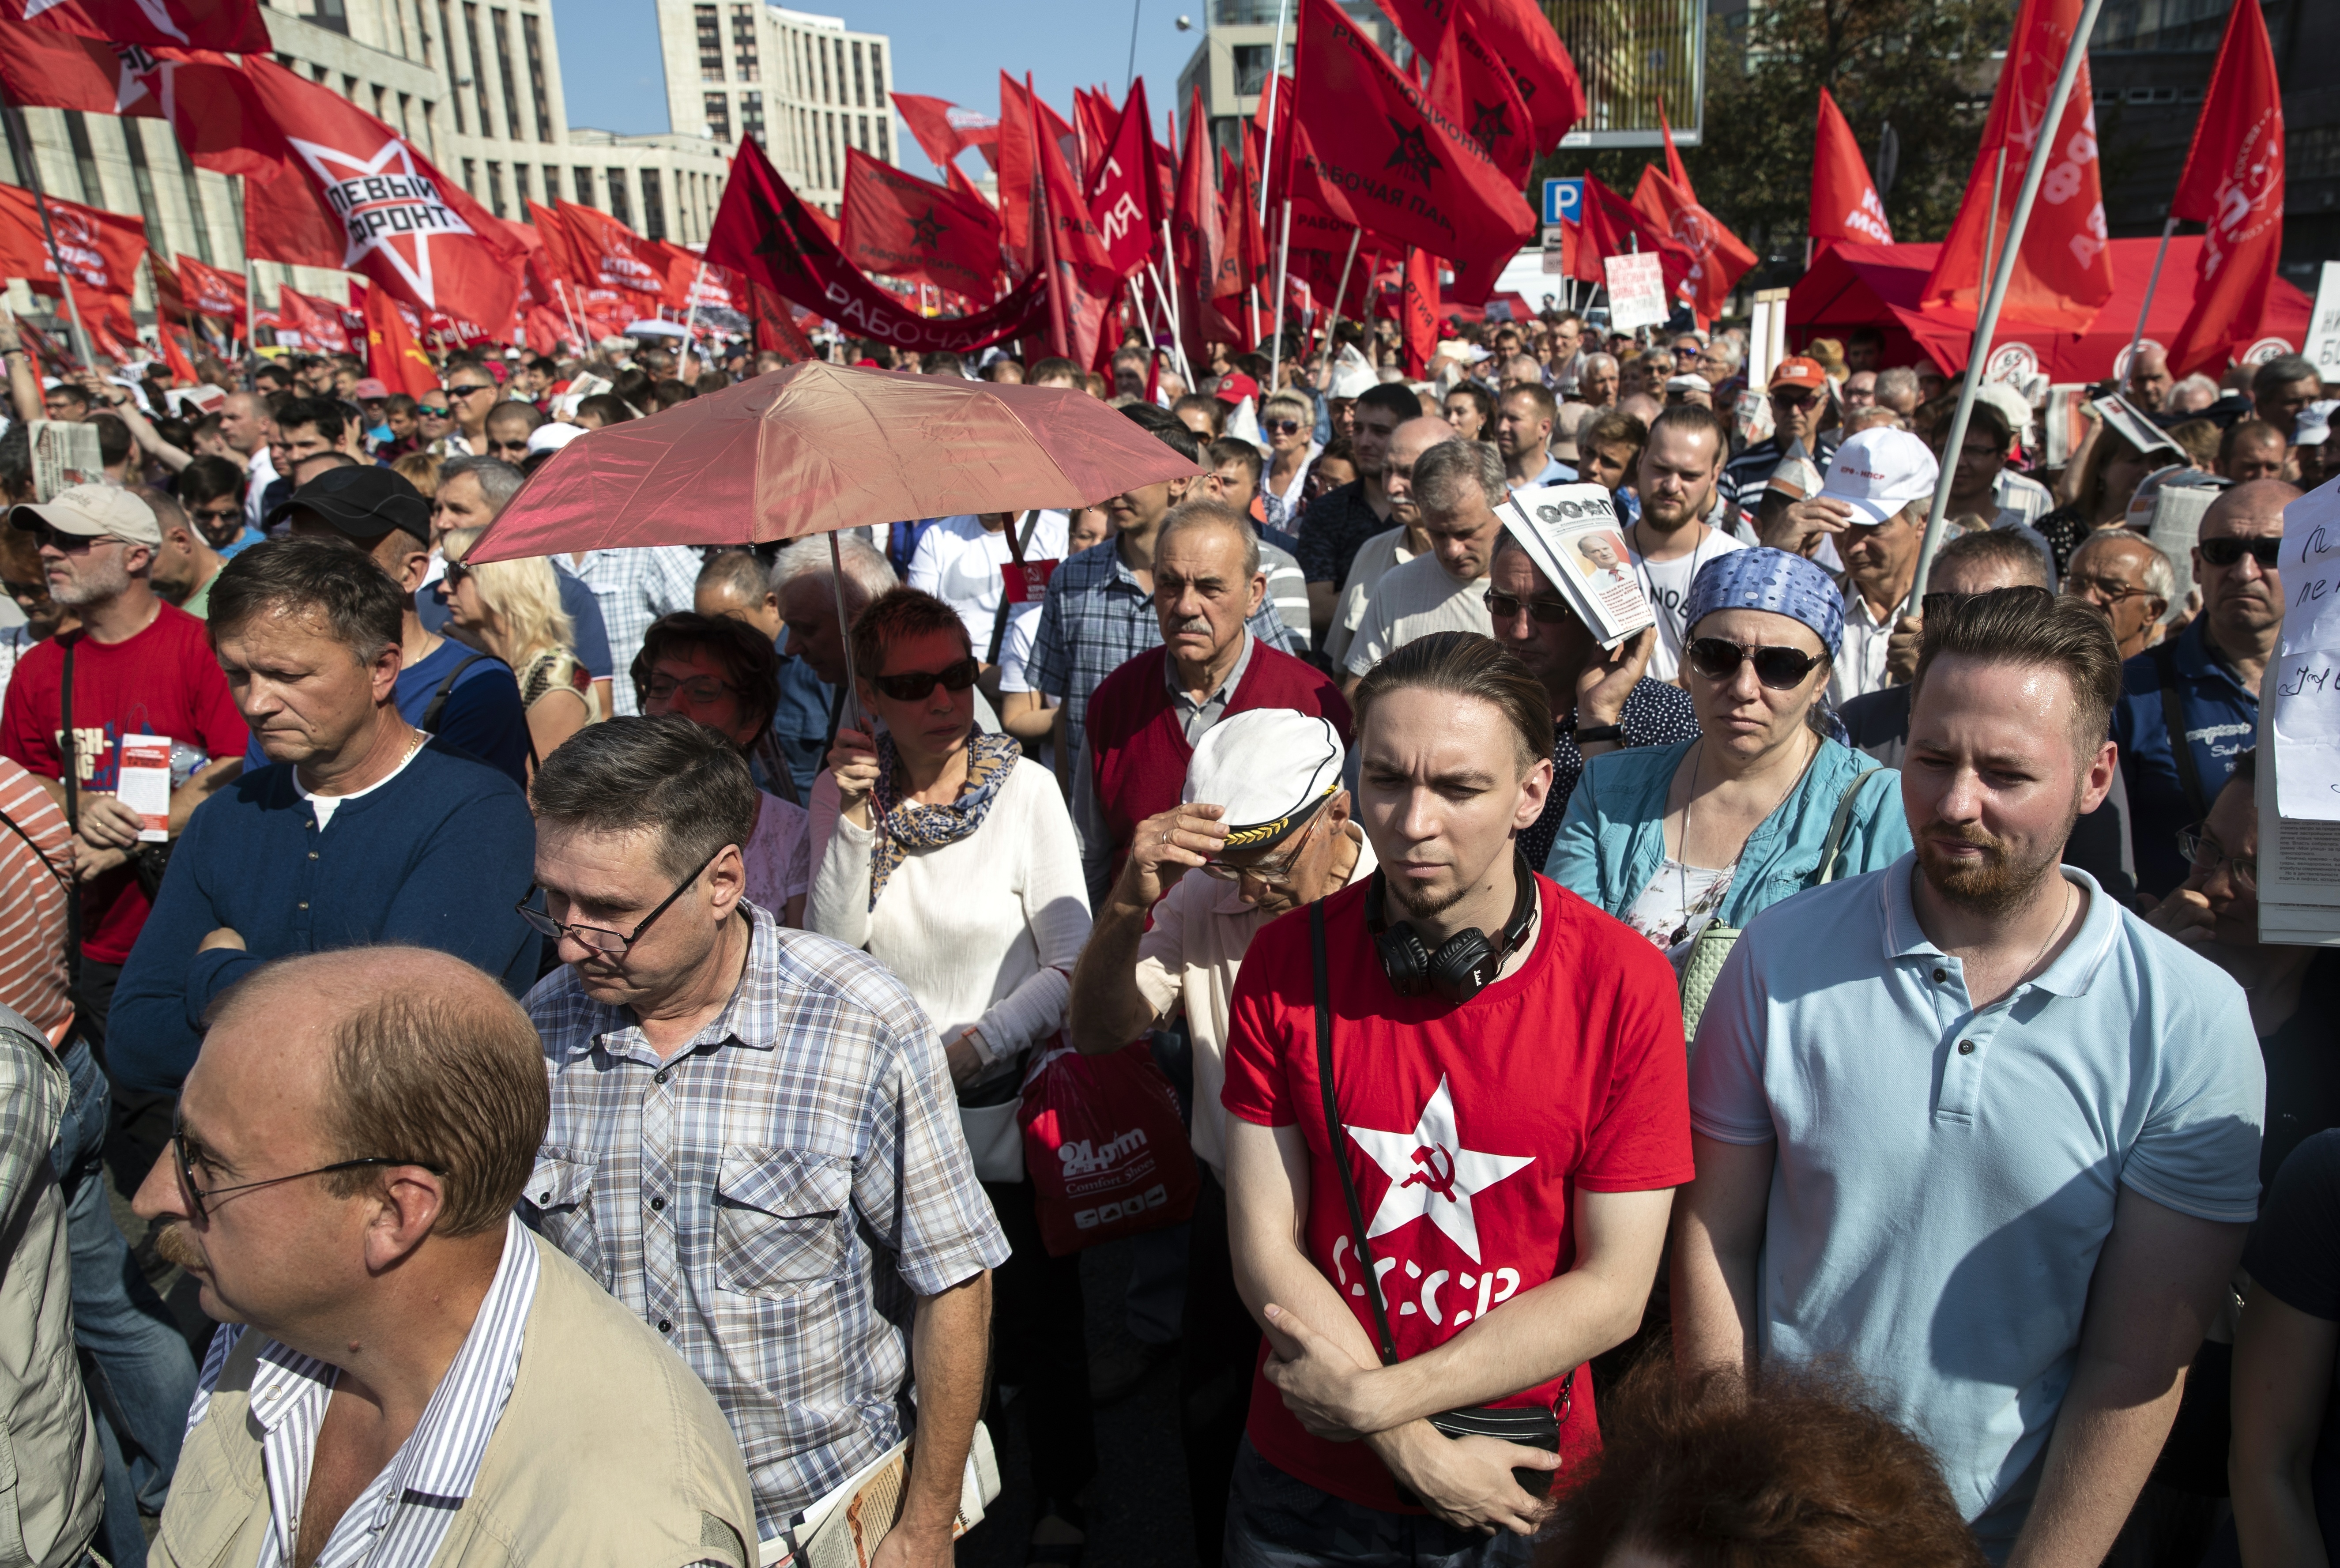 People attend the Communist Party rally protesting against retirement age hikes in Moscow